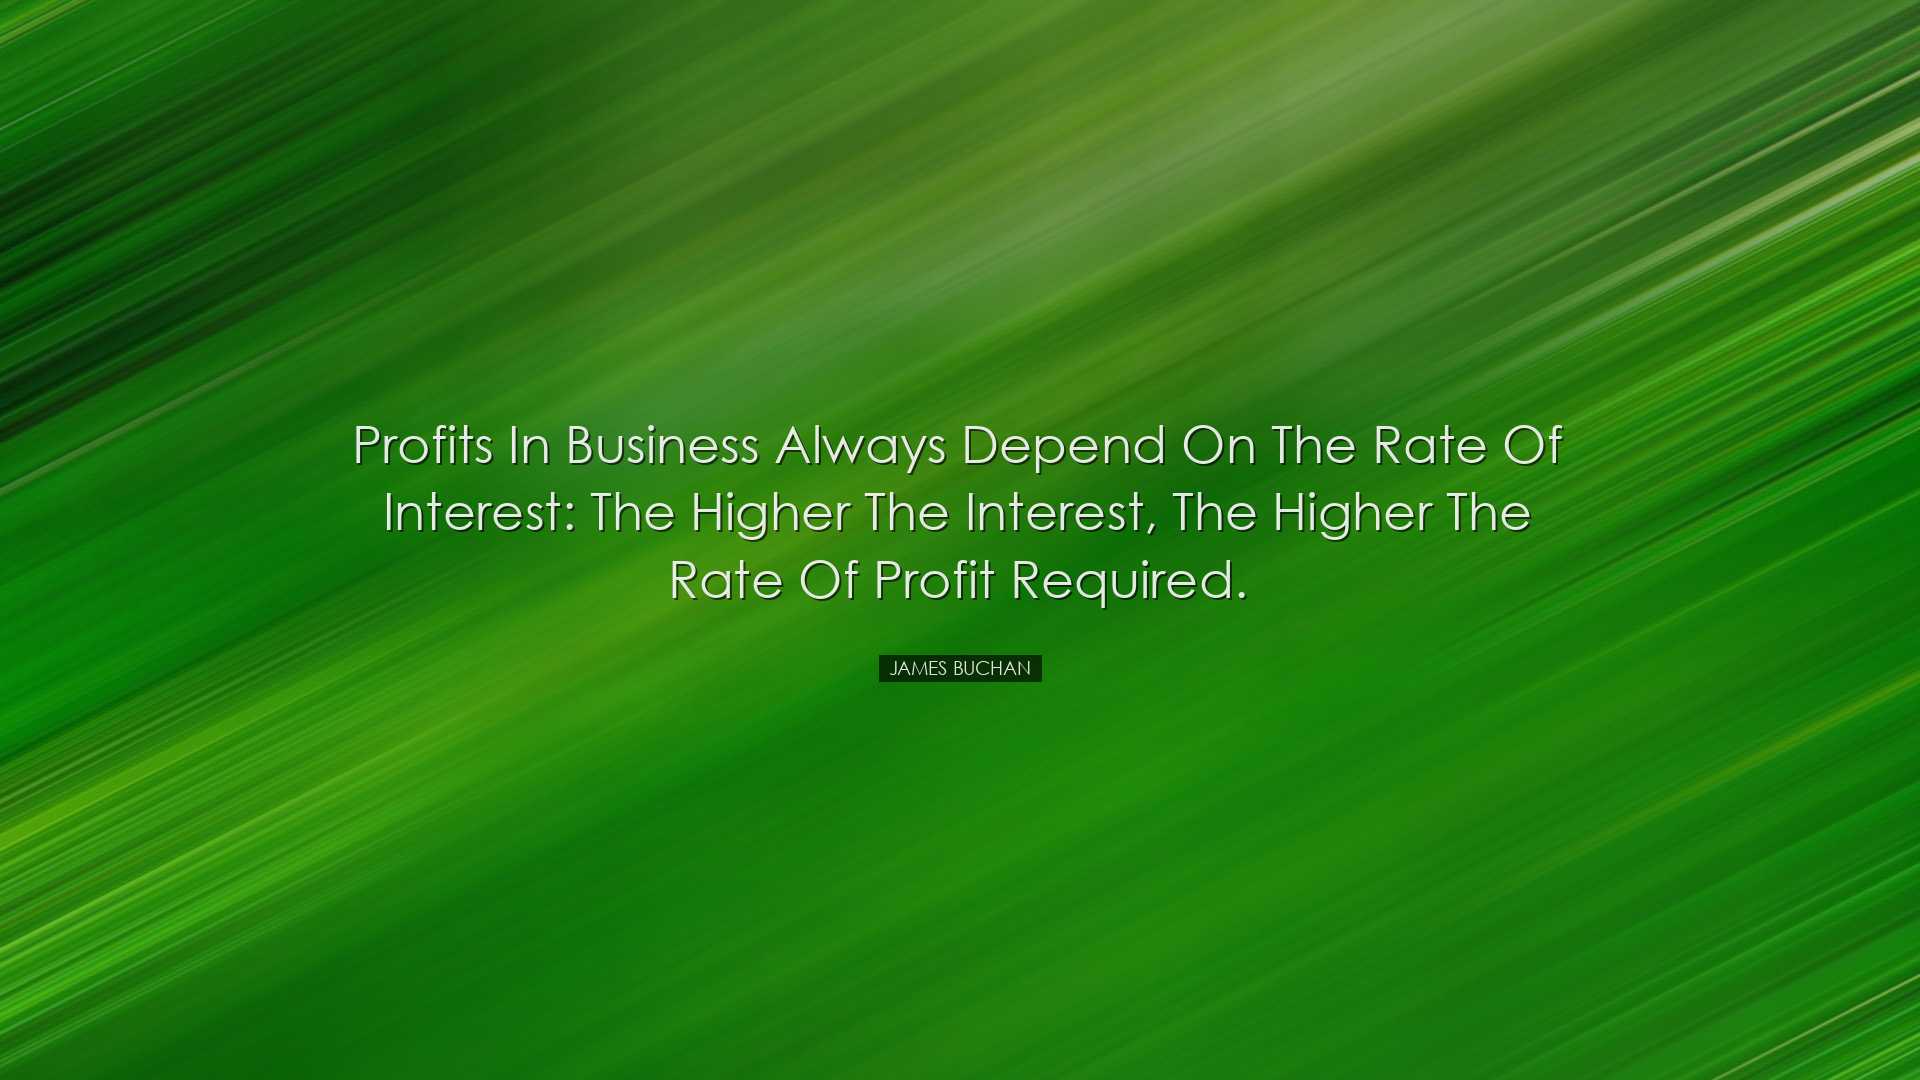 Profits in business always depend on the rate of interest: the hig